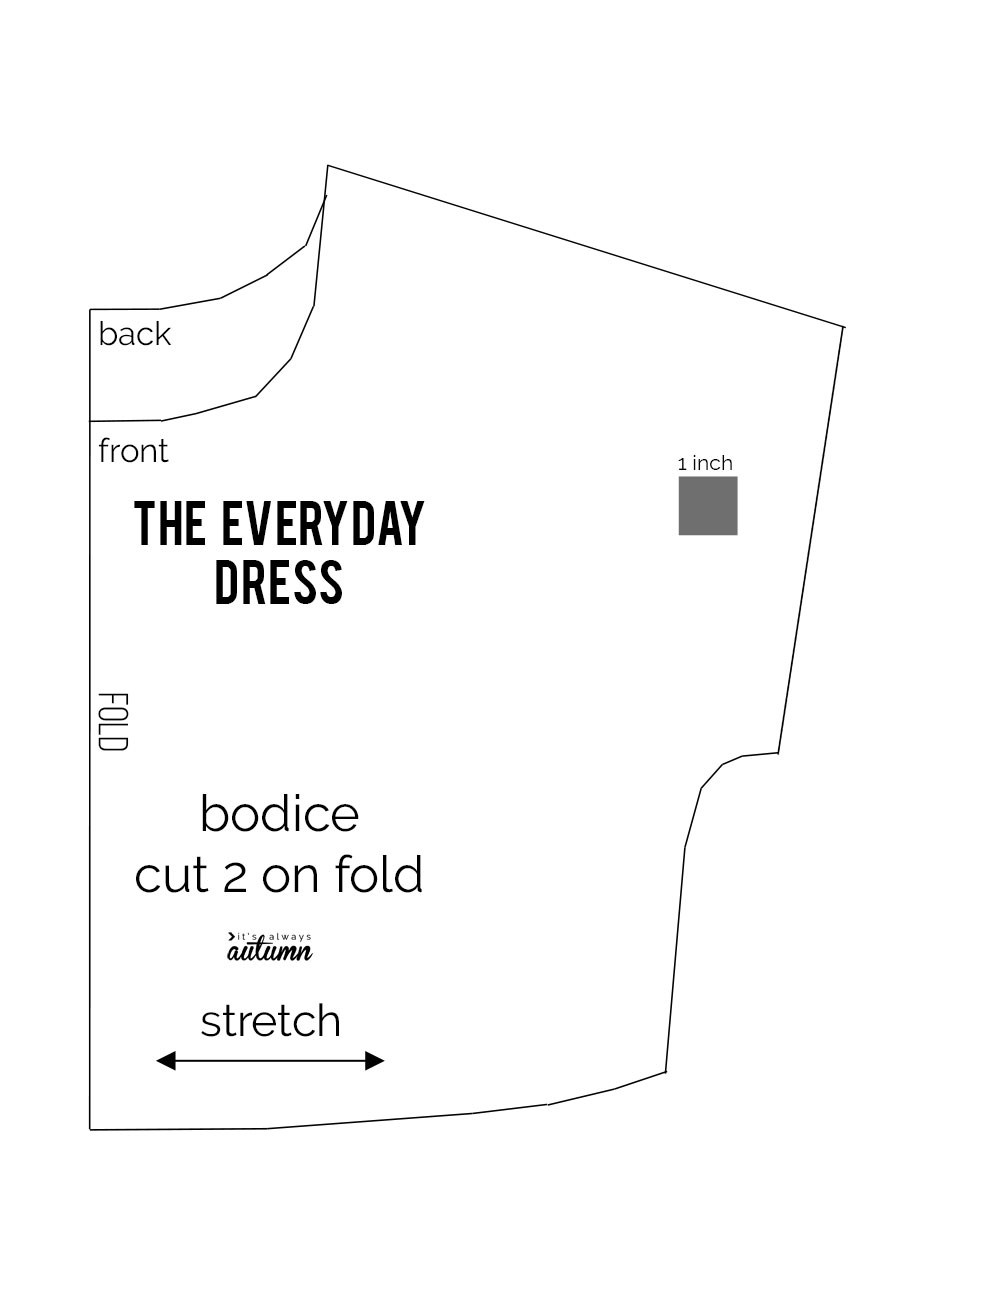 Bodice pattern diagram for The Everyday Dress sewing pattern